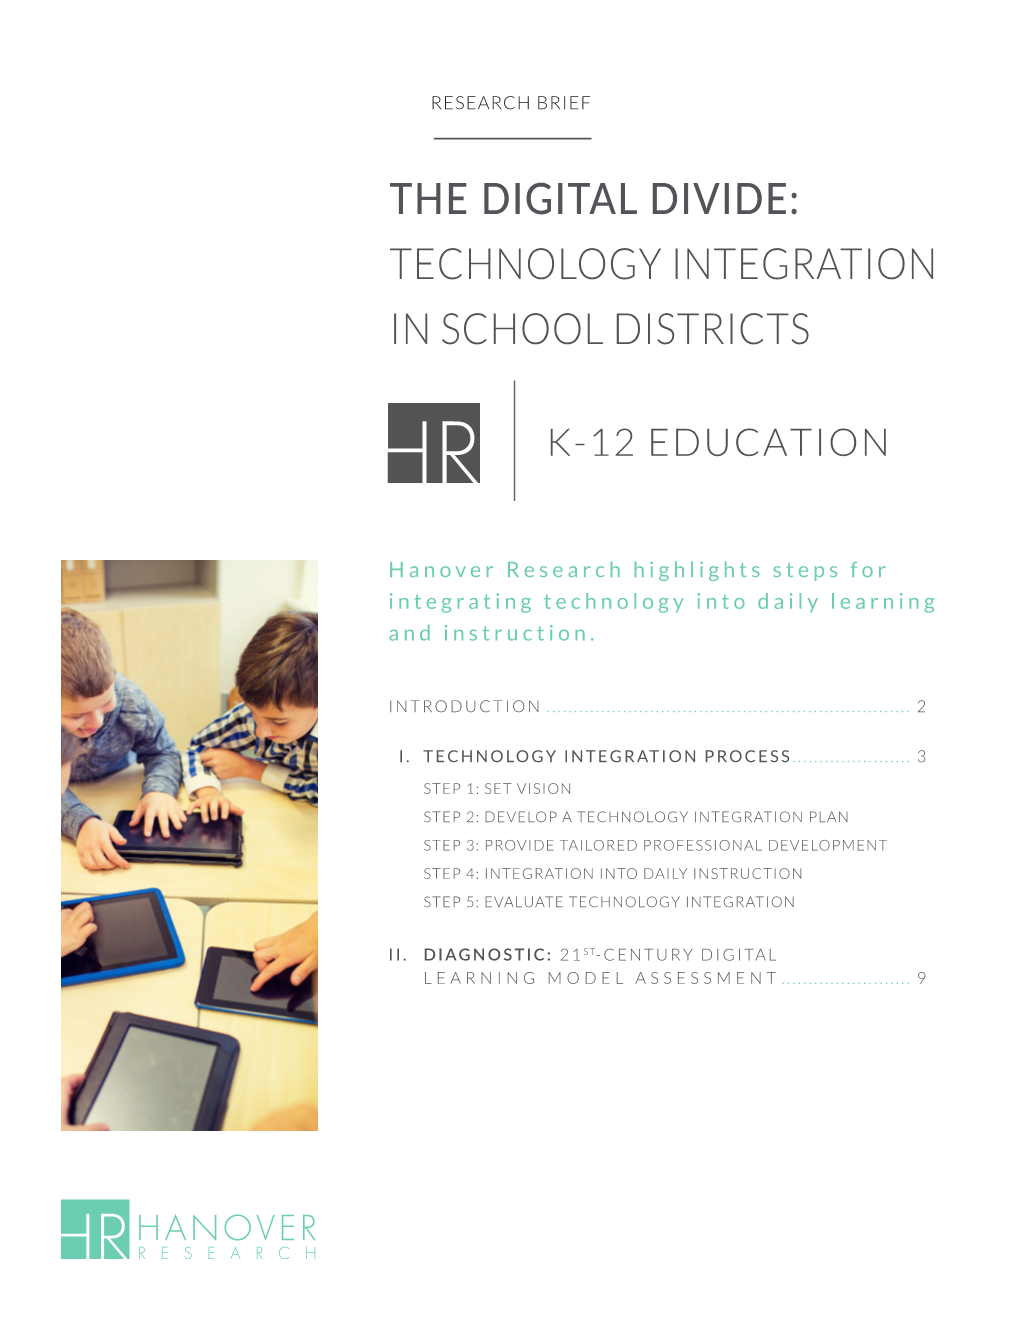 The Digital Divide: Technology Integration in School Districts